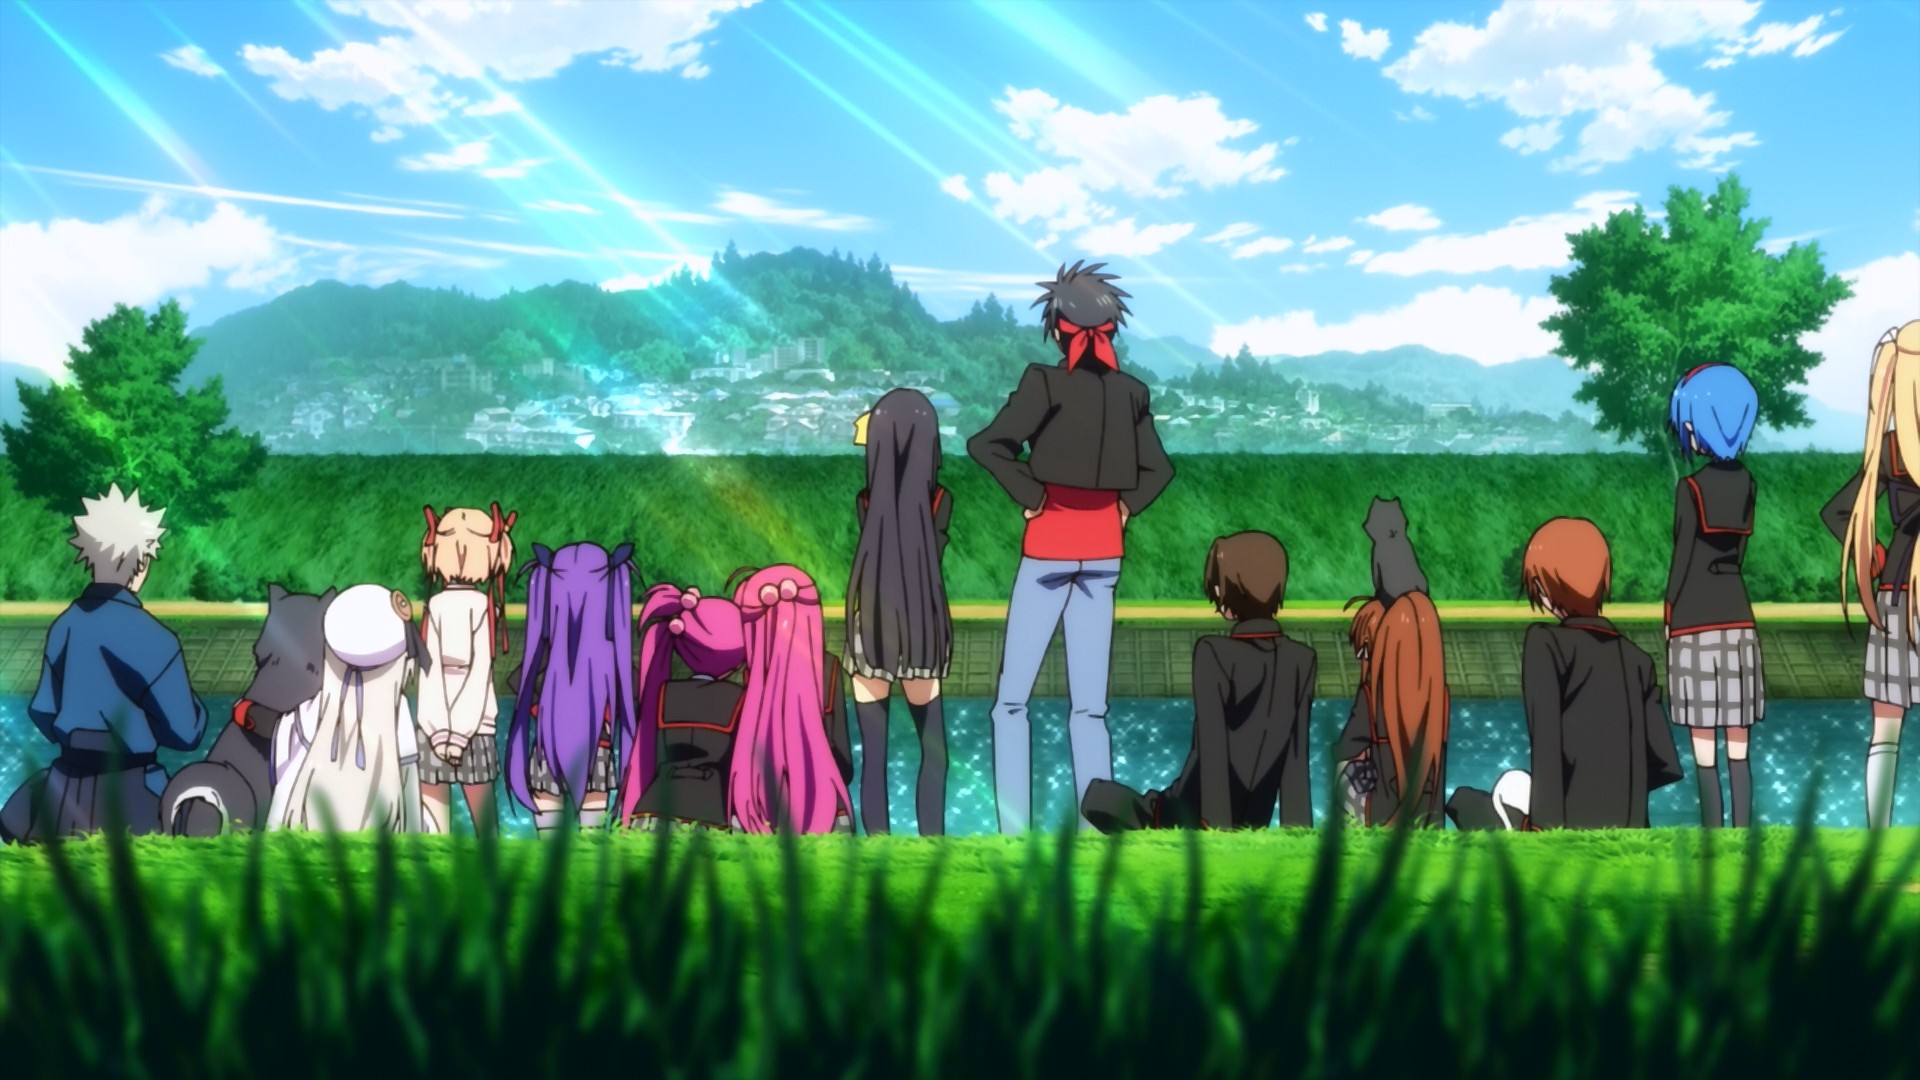 [BakeSubs-Diogo4D] [BD][1080p] Little Busters! EX 08